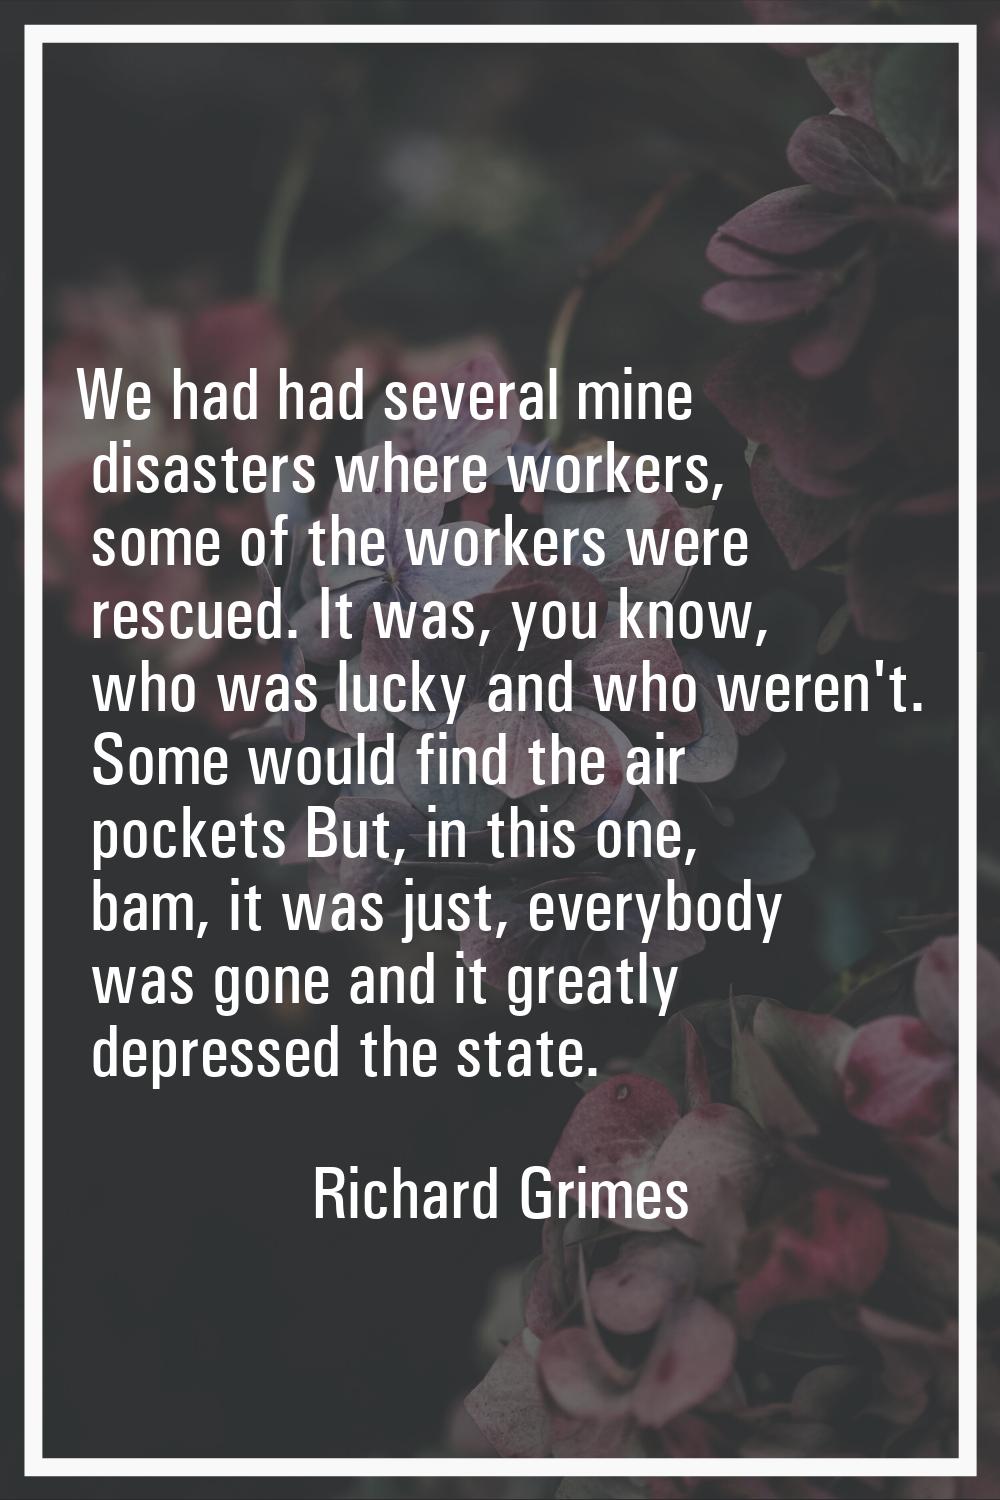 We had had several mine disasters where workers, some of the workers were rescued. It was, you know